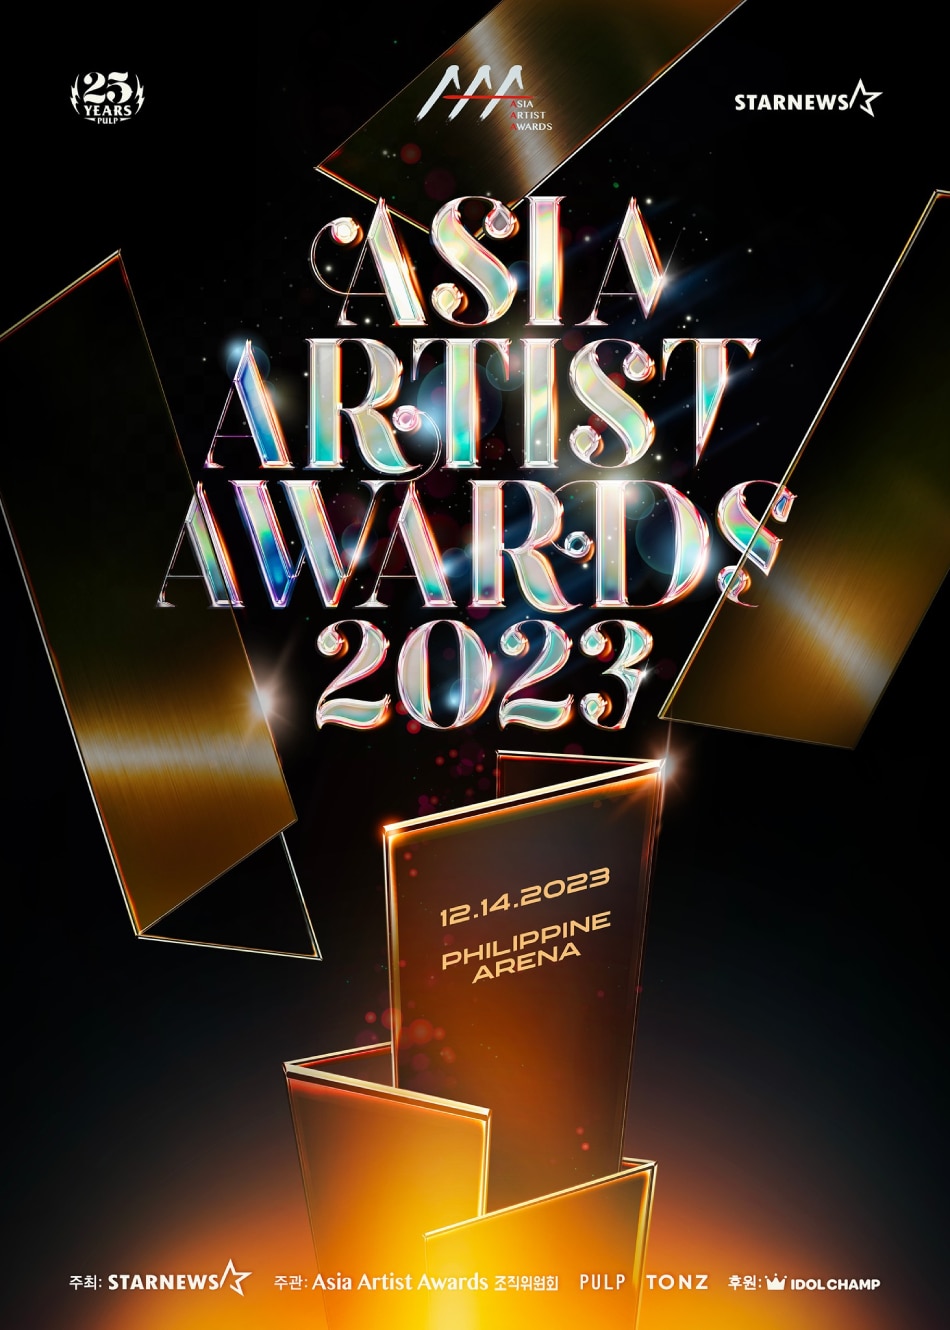 Attending the 2023 Asia Artist Awards? Here's what you need to know